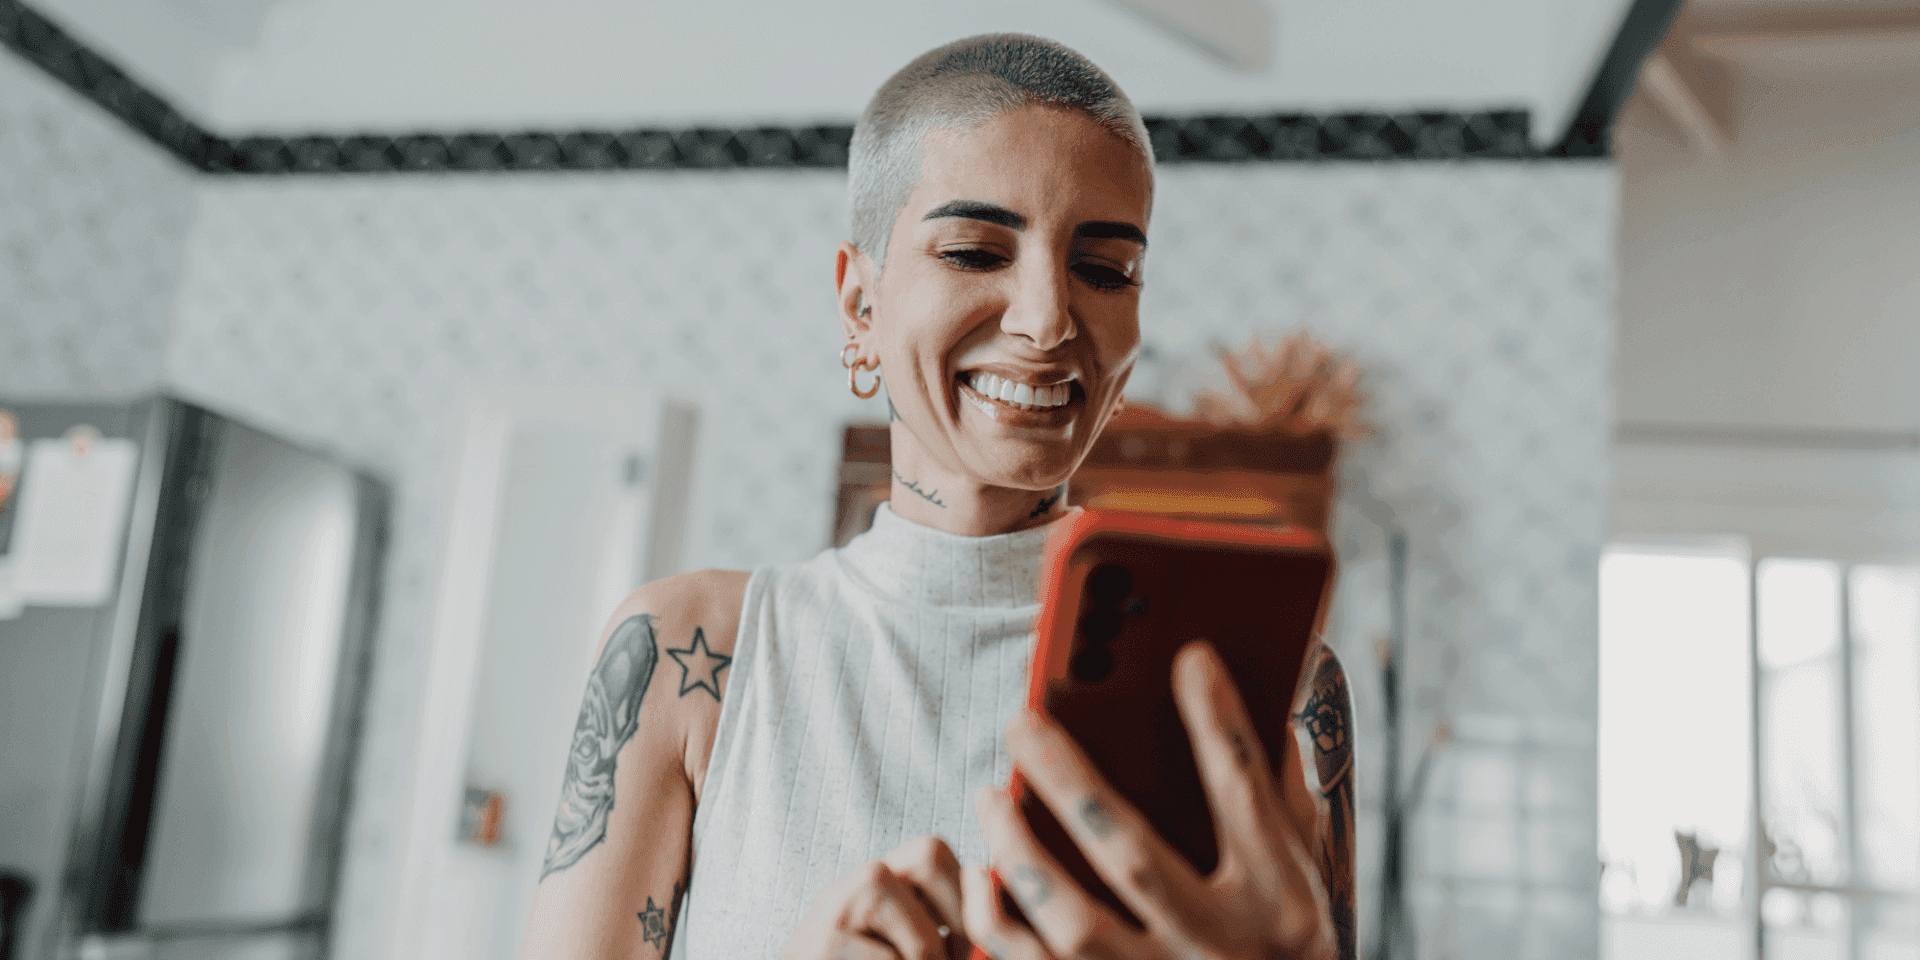 A woman with a shaved head and tattoos scrolling on her red phone. She is smiling lightly.